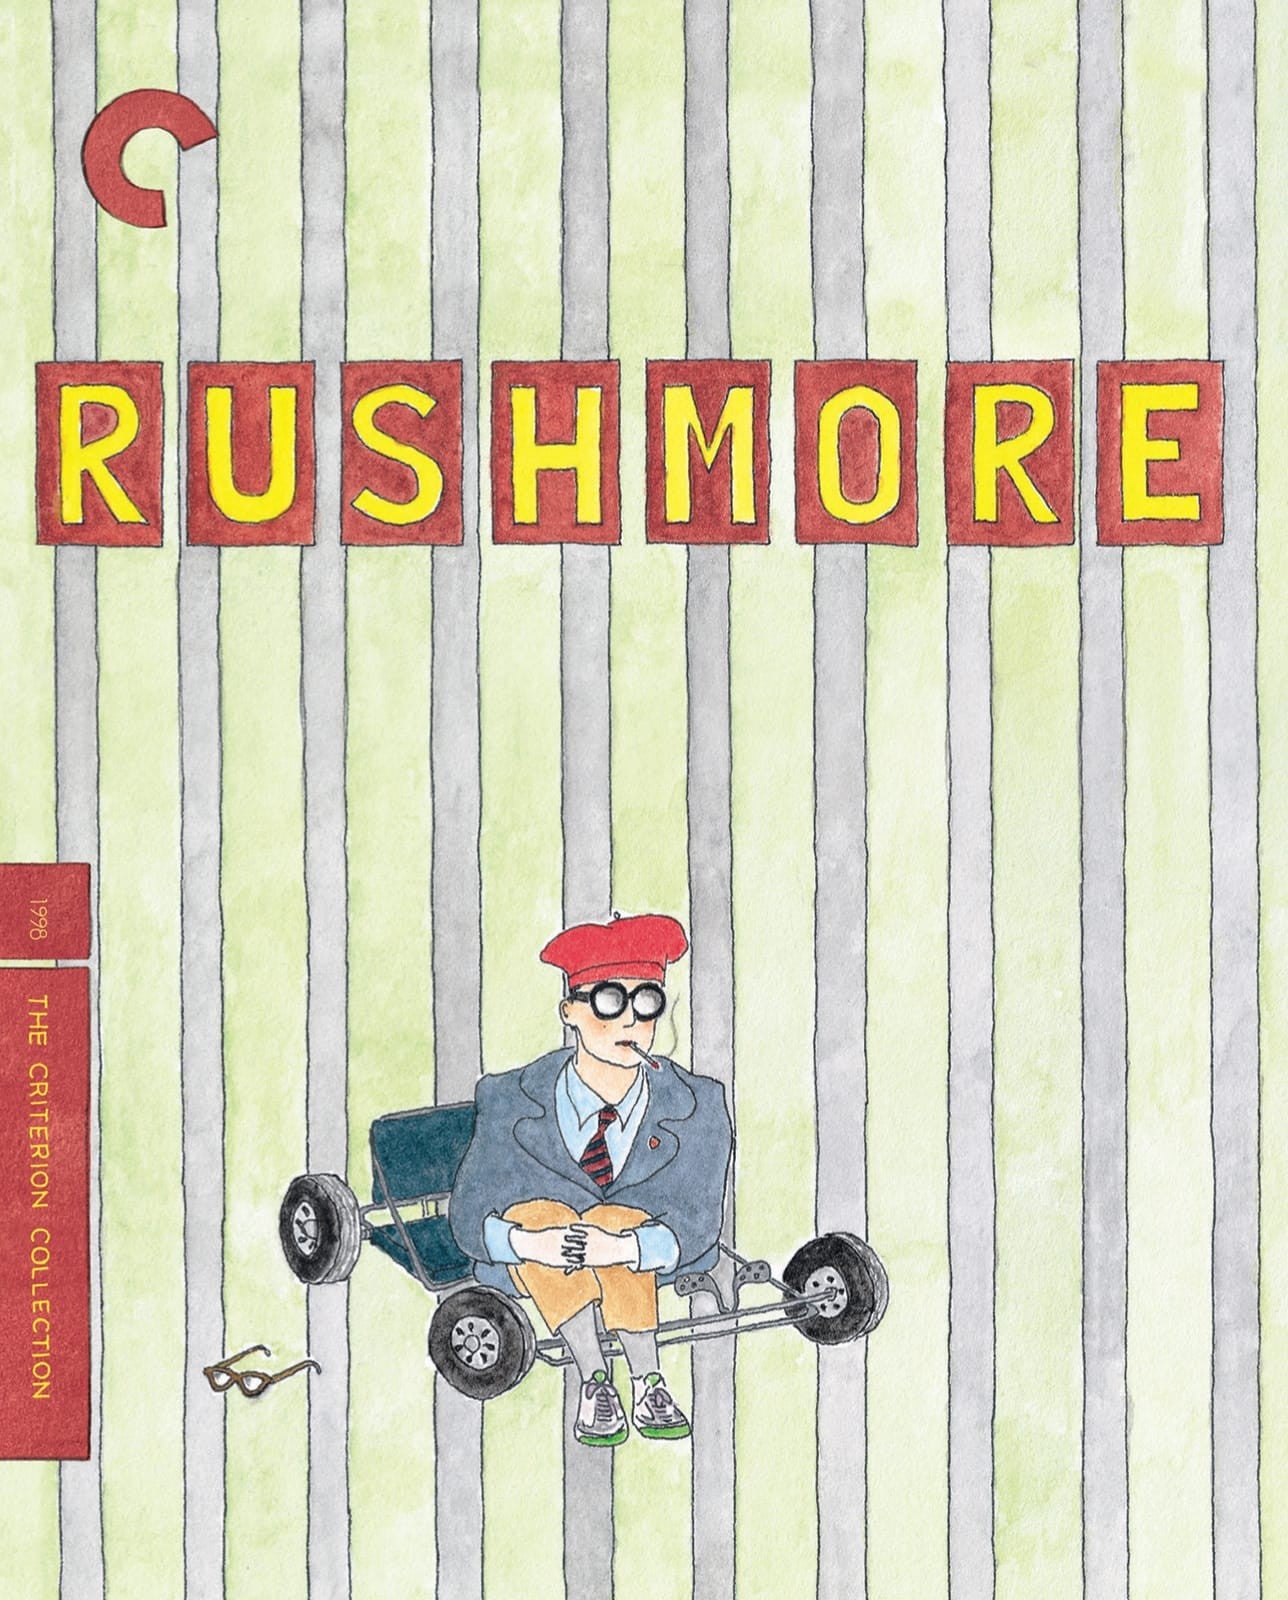 Rushmore - Criterion Collection (Blu-ray)